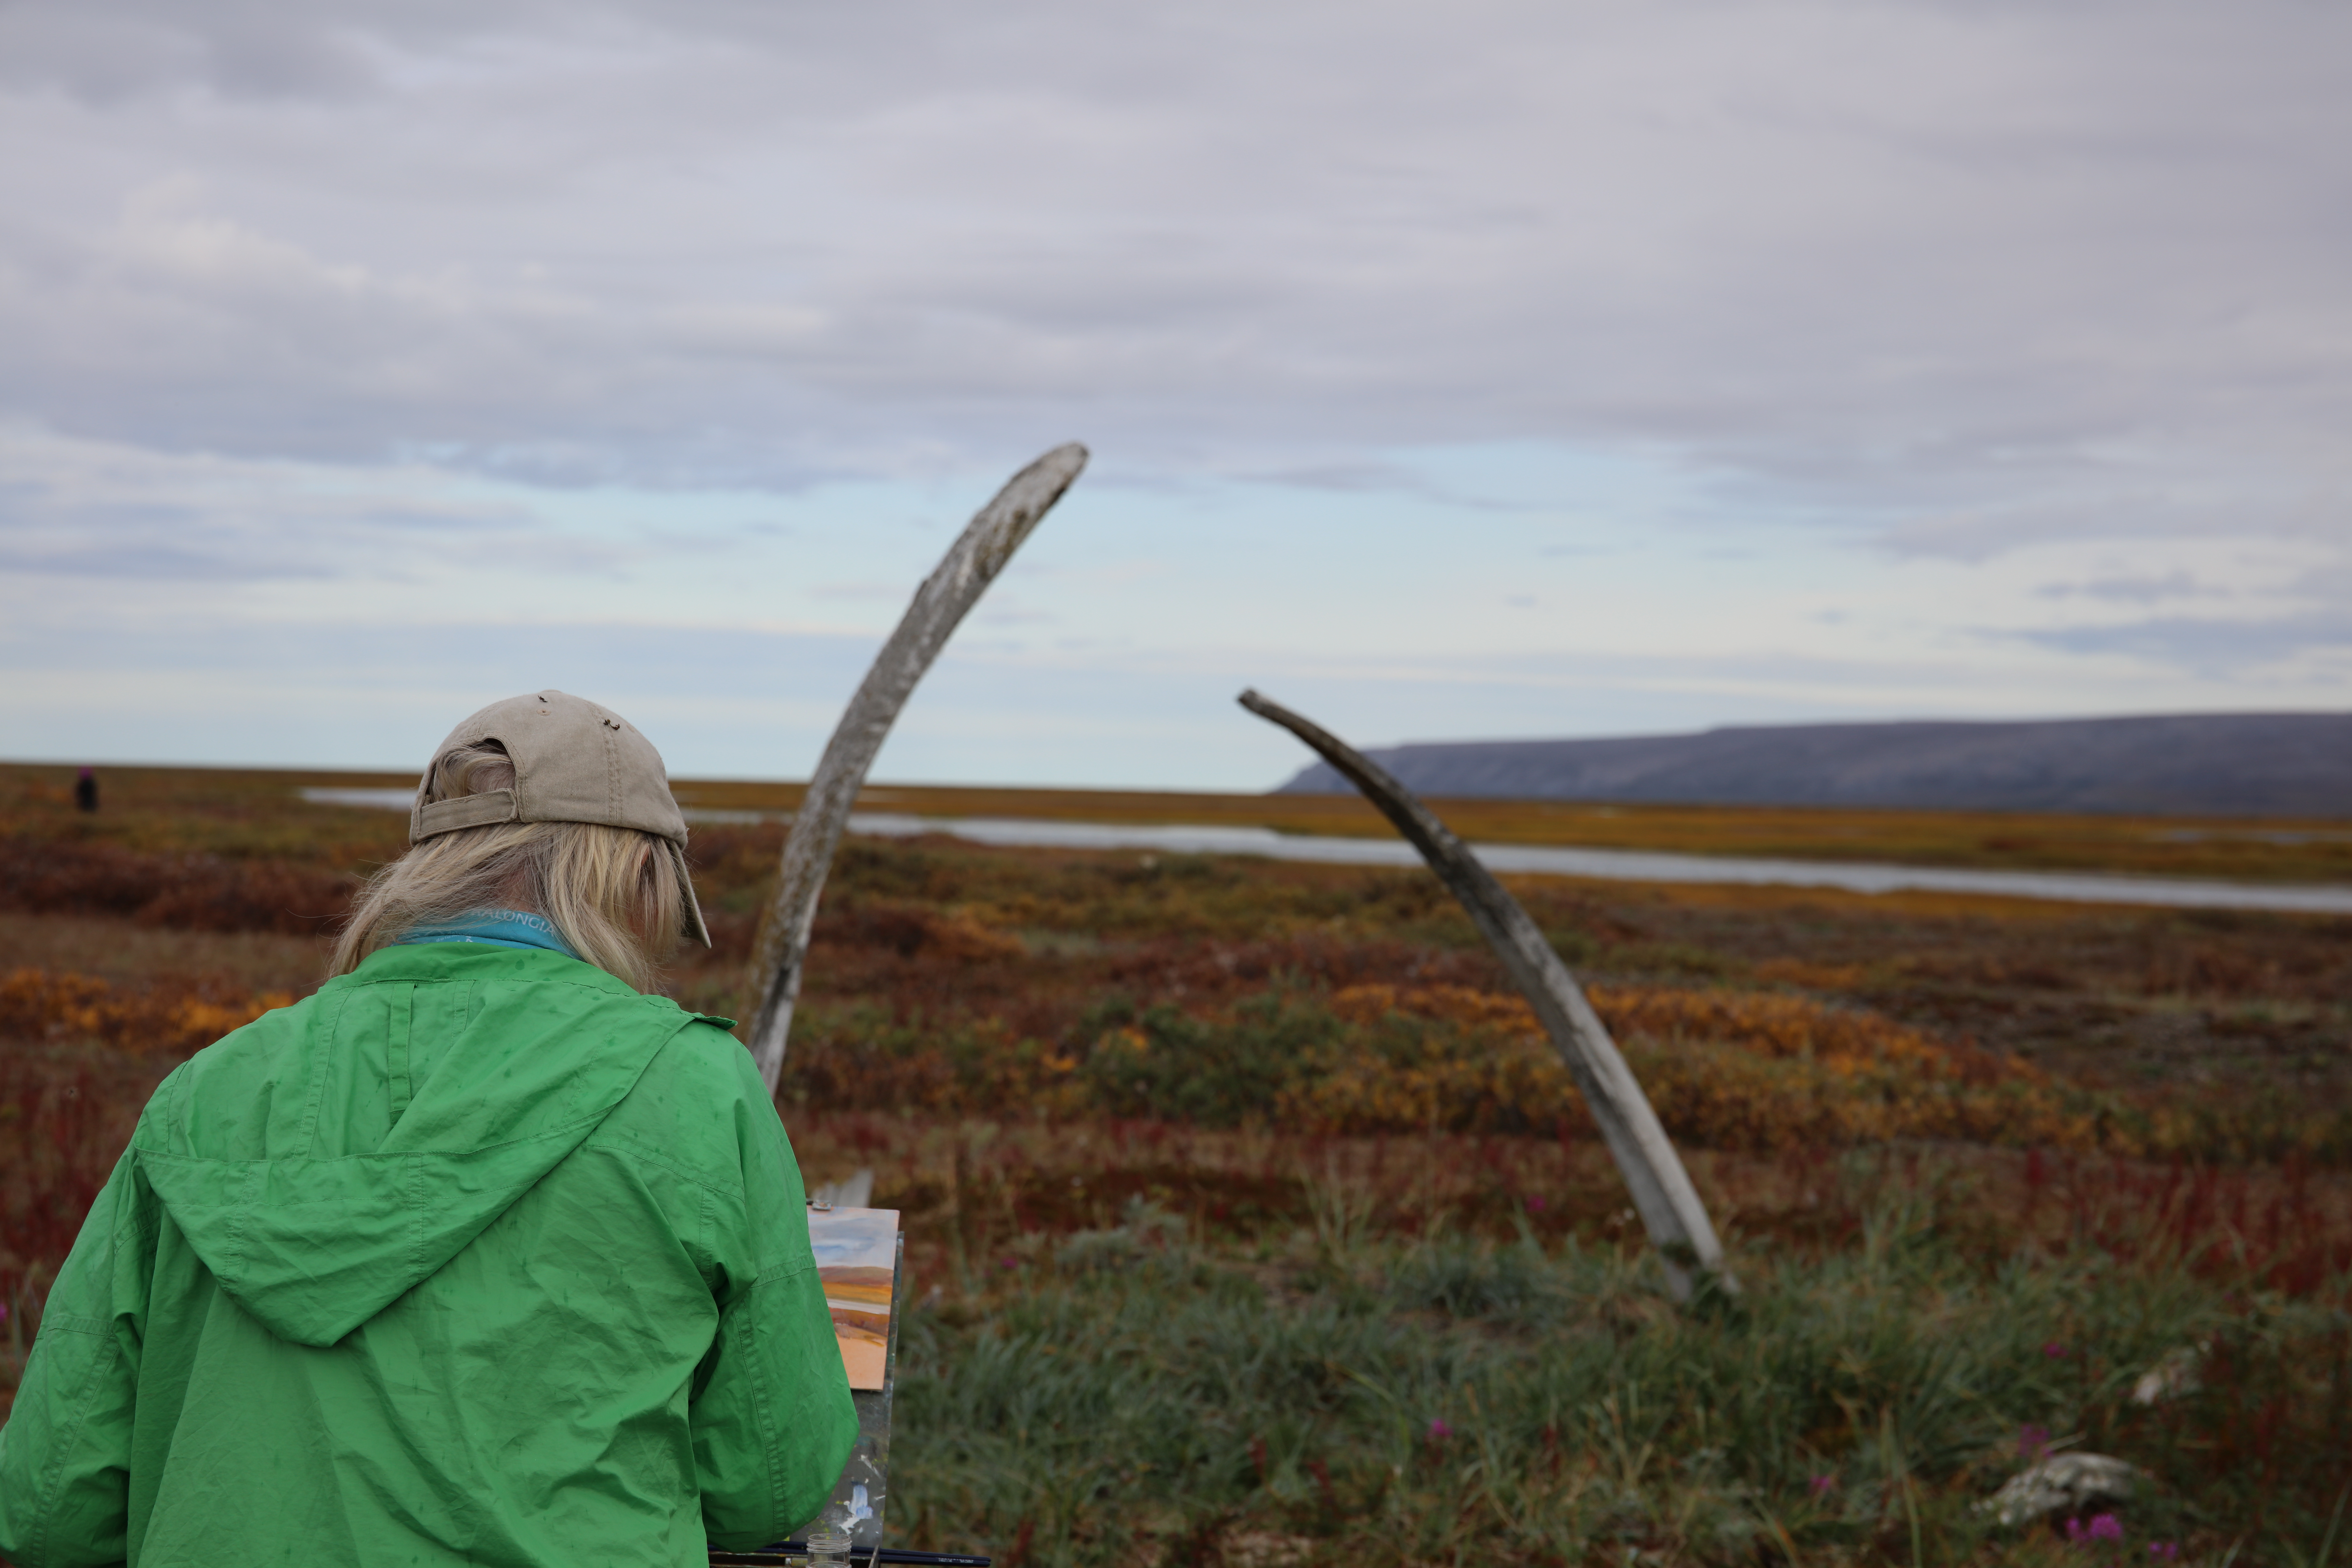 A woman paints the scene of whale jaw bones and tundra in front of her. 